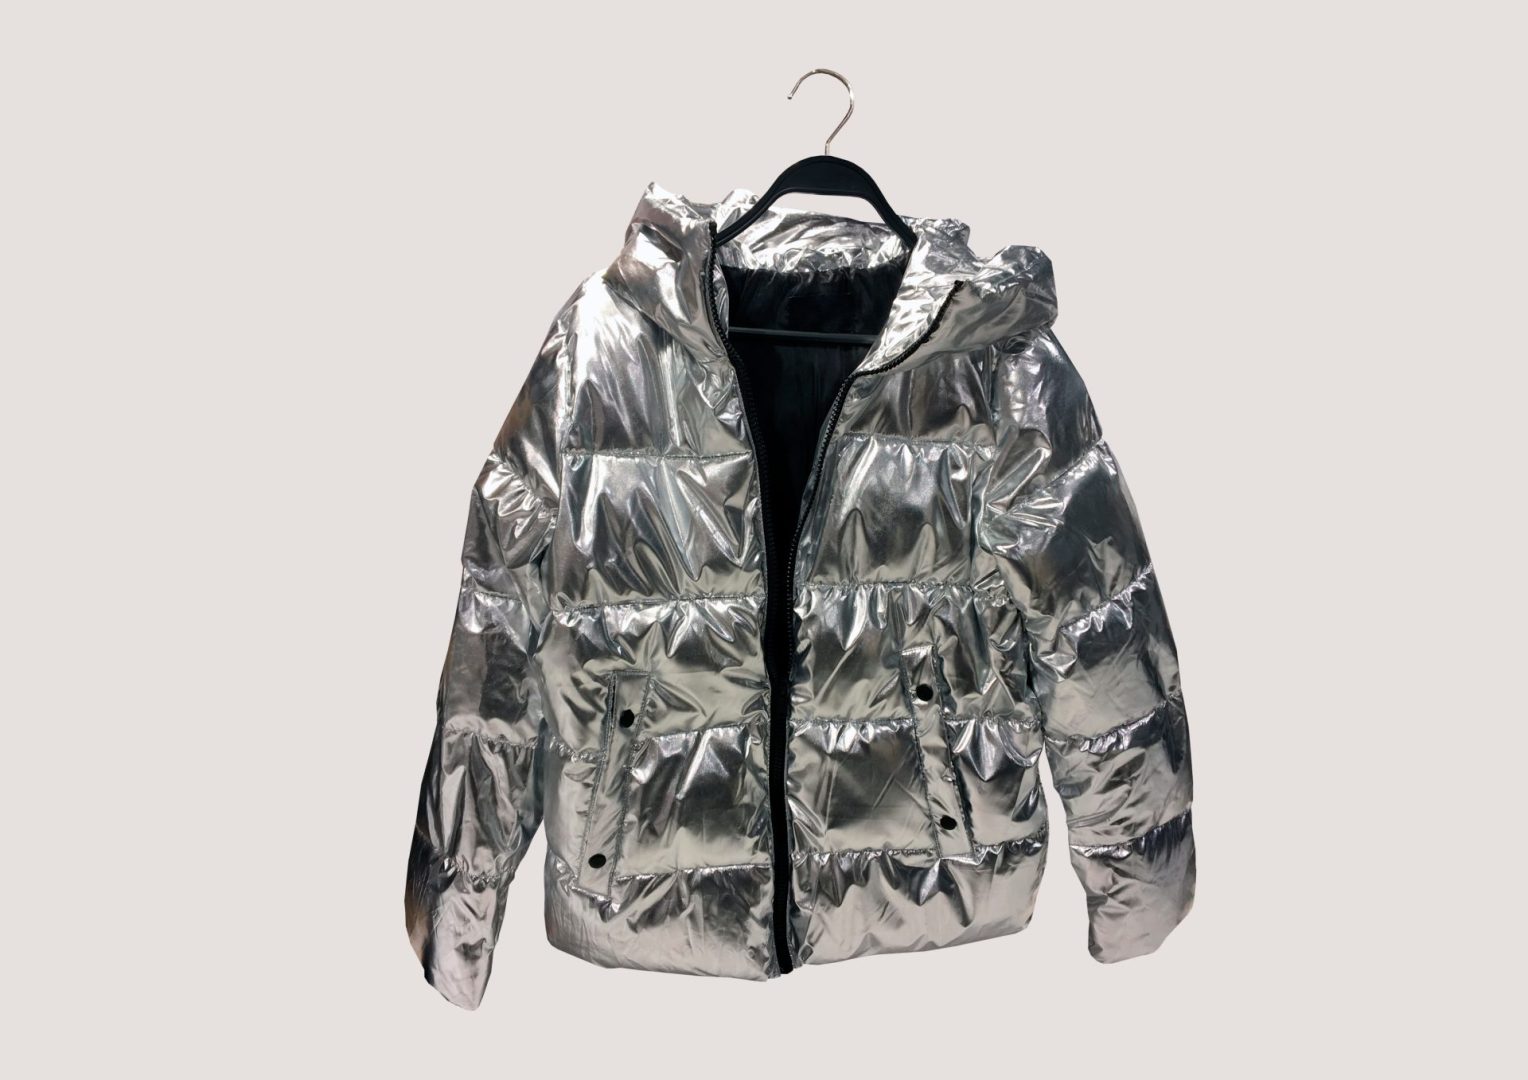 Look why these puffer jackets re-entered the fashion scene